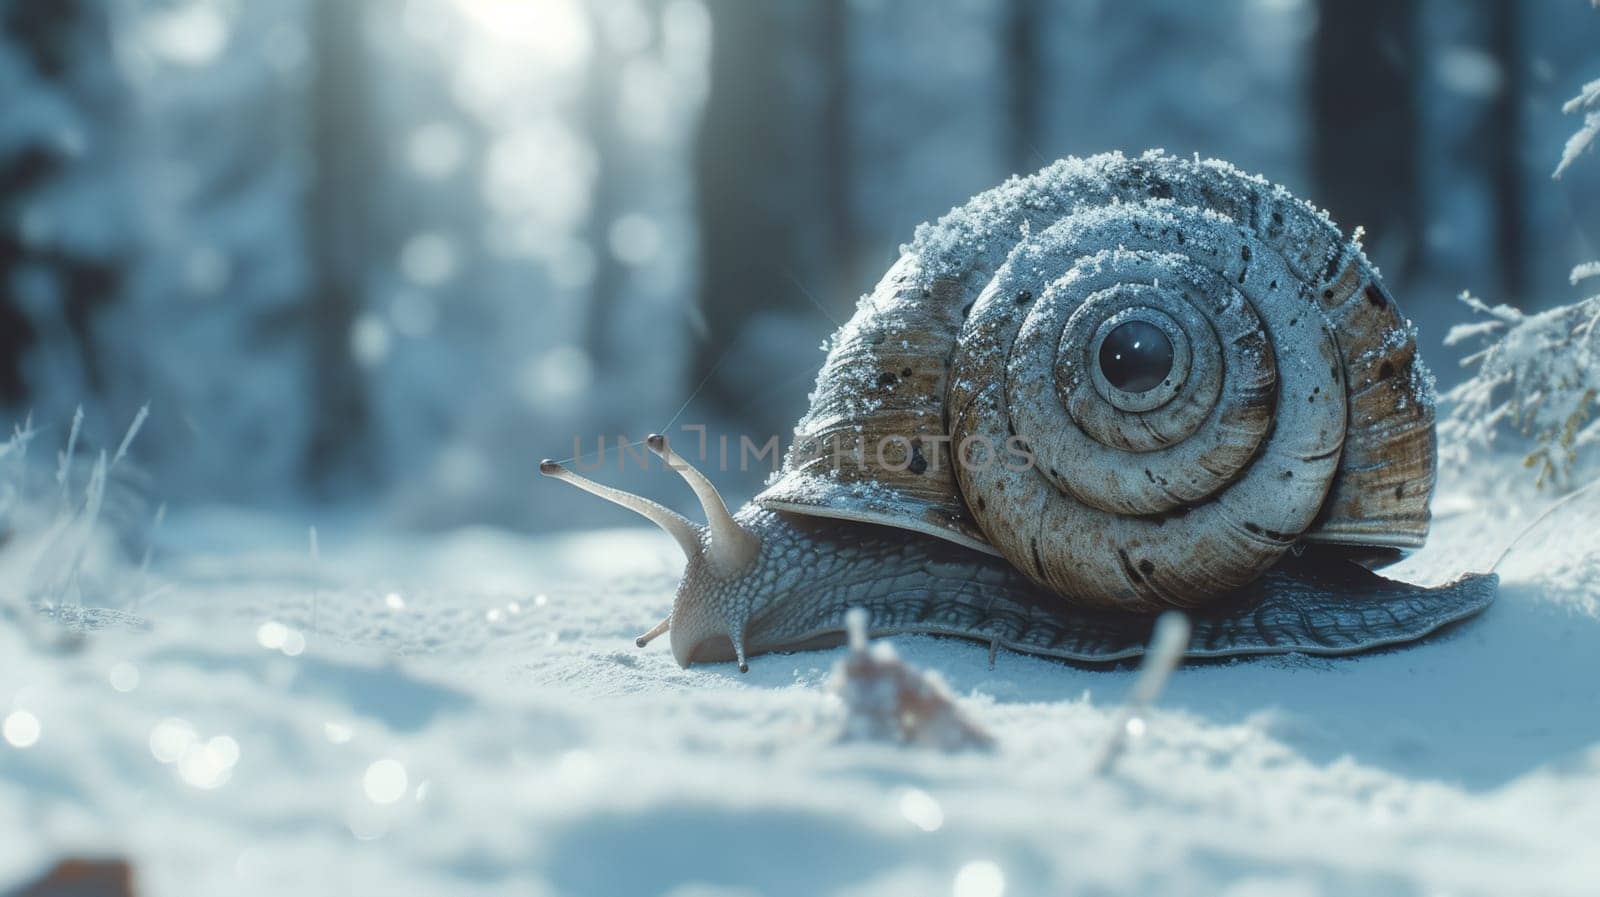 A snail is walking on the snow covered ground